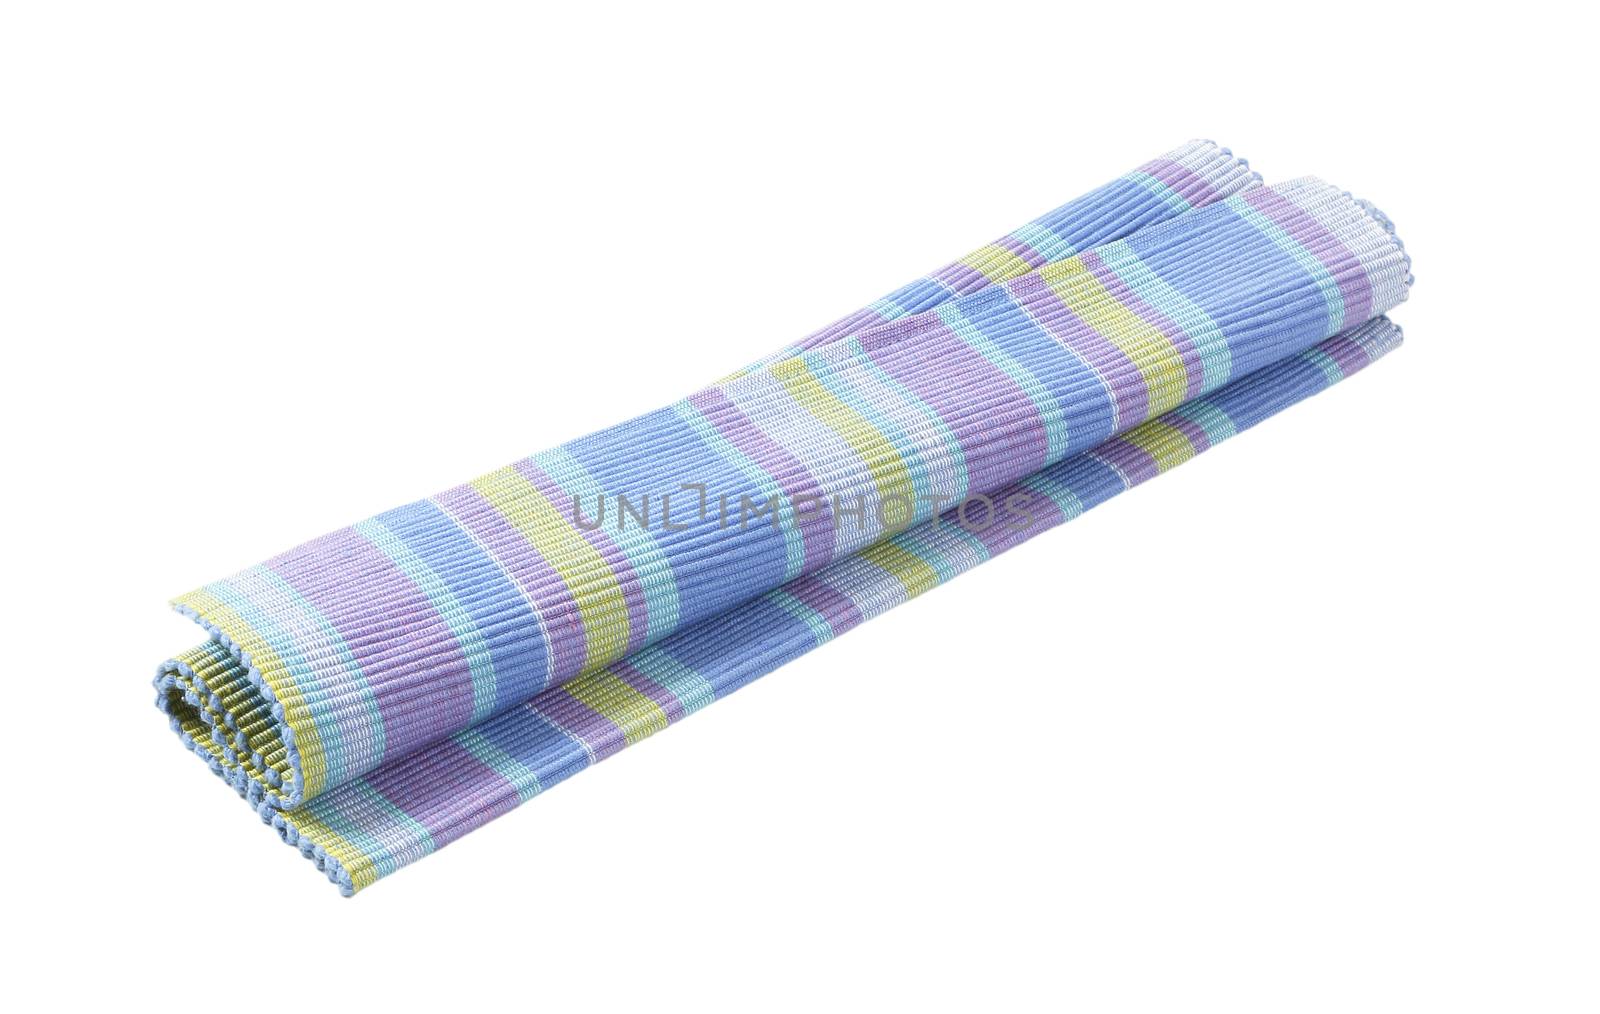 Colorful striped ribbed woven cotton place mat isolated on white